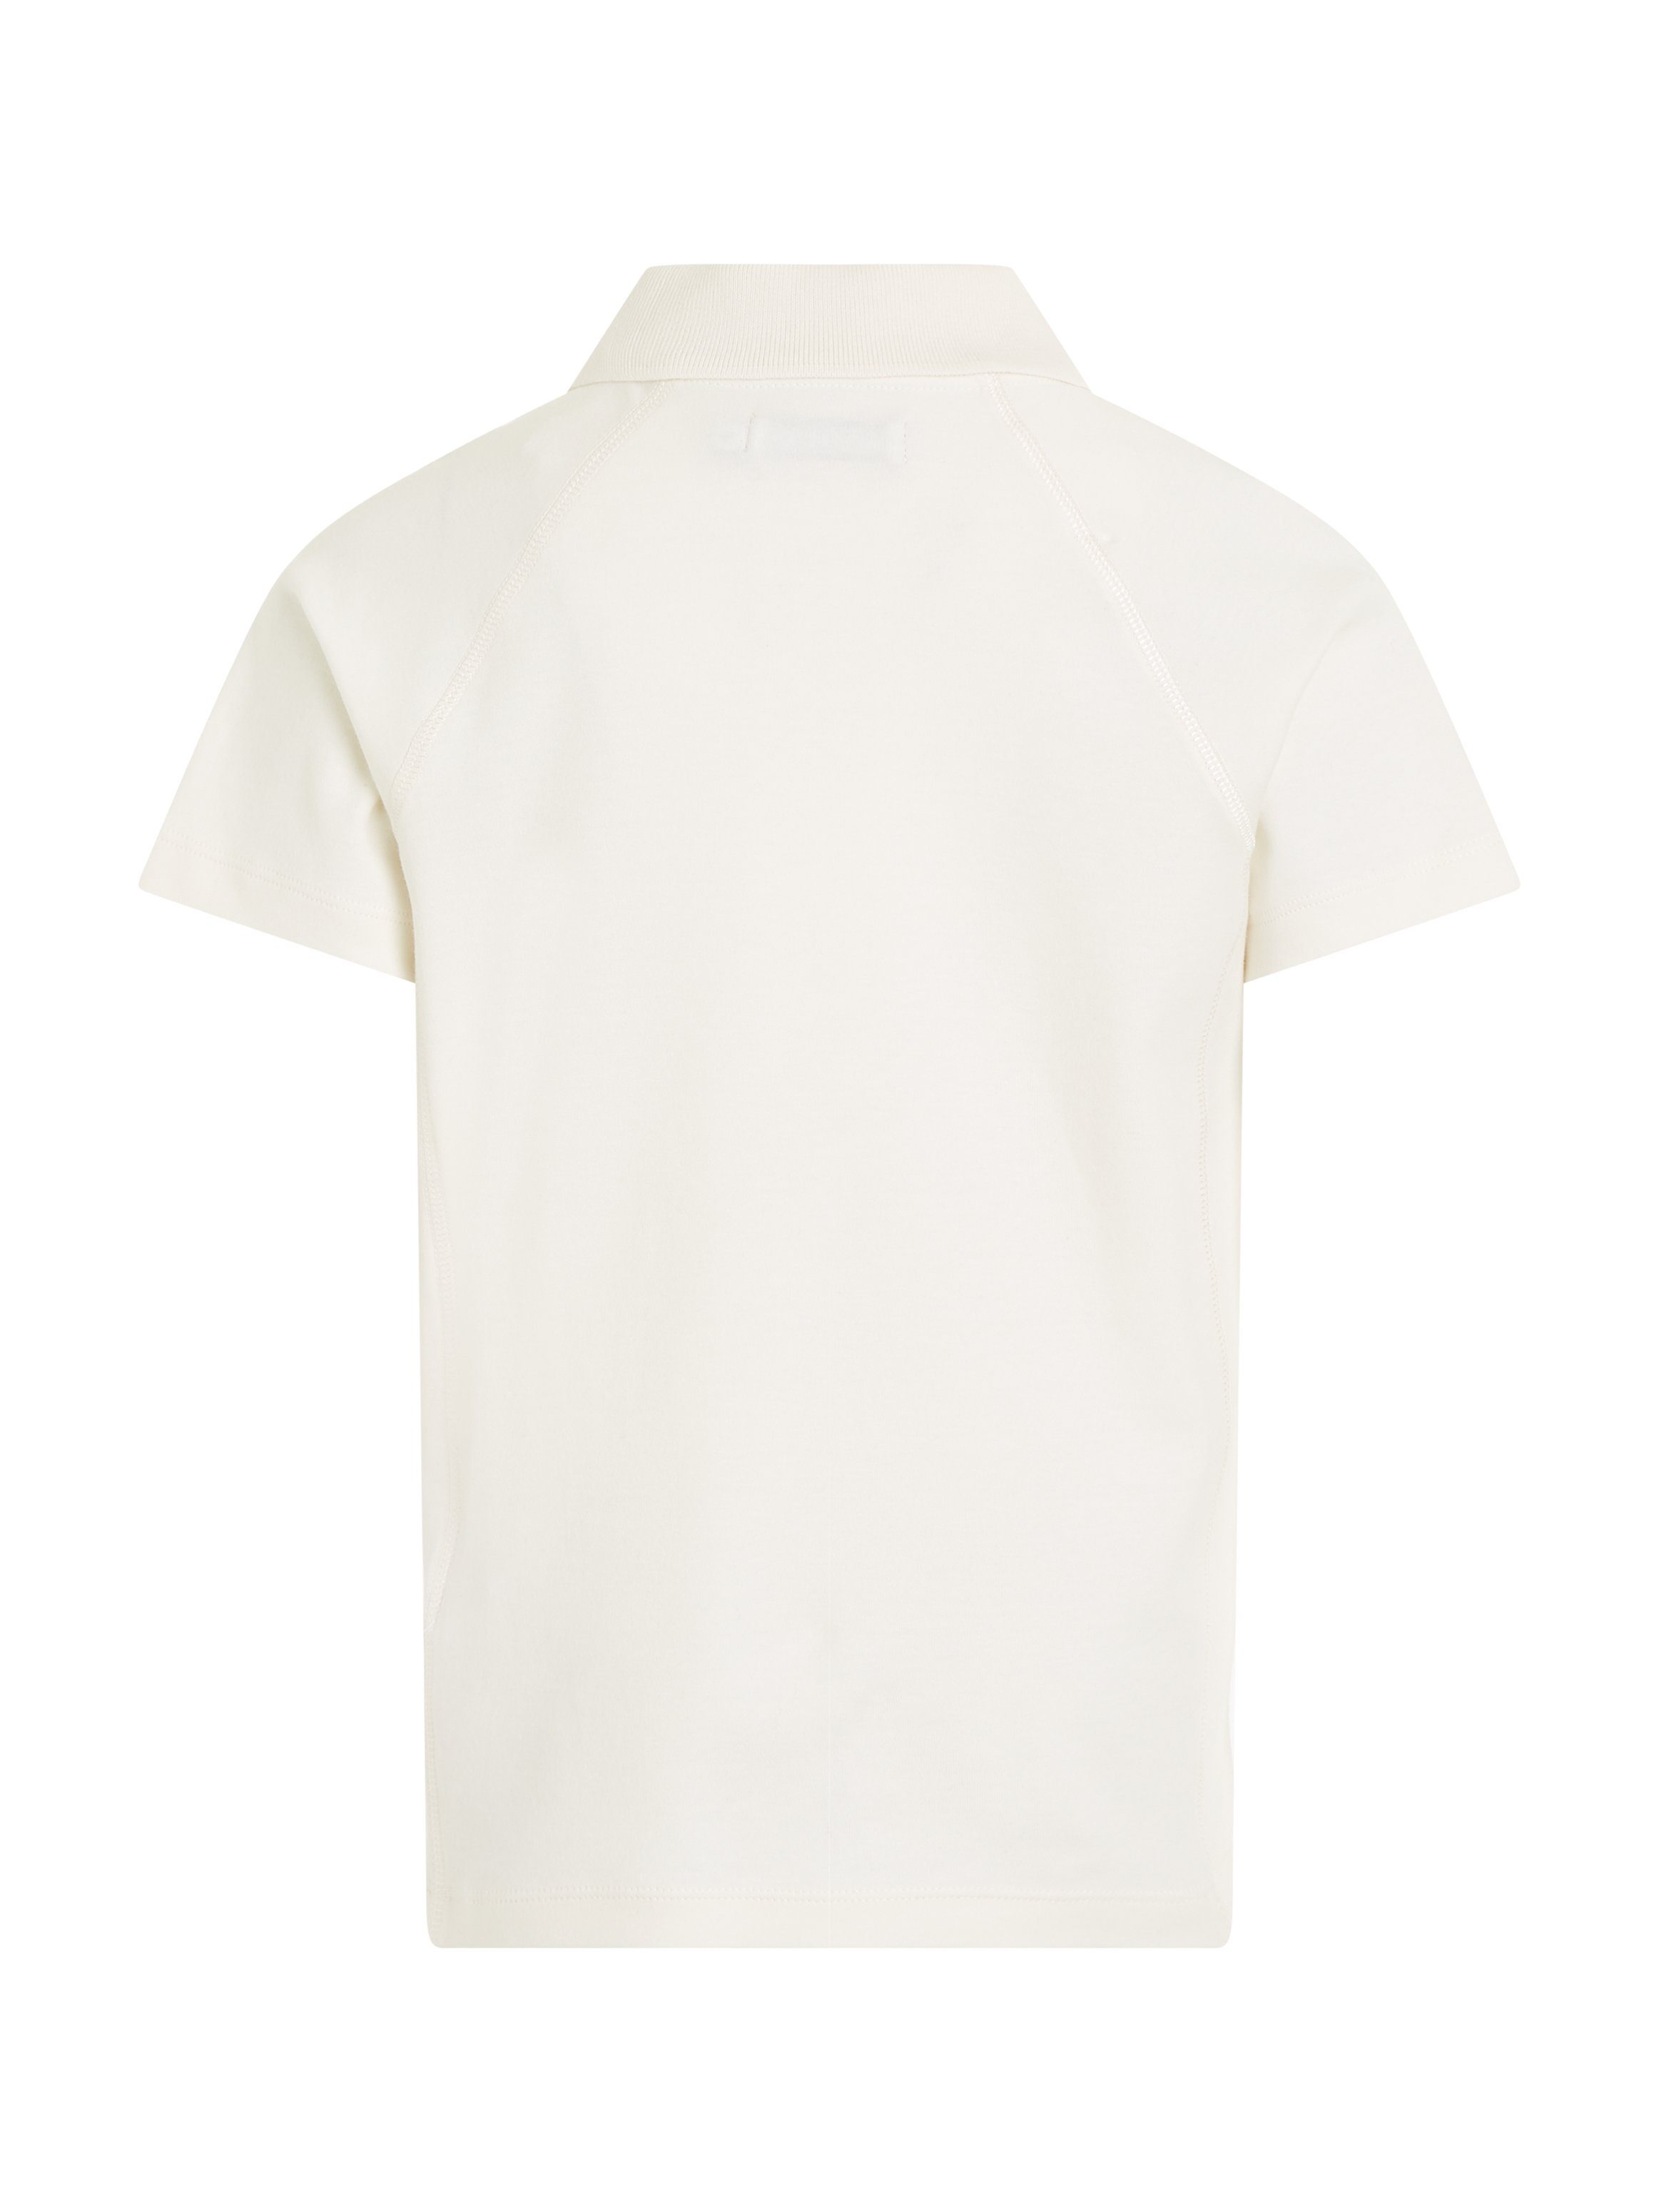 Klein Jeans Logopatch CEREMONY White Poloshirt POLO Calvin SOFT Bright JERSEY mit